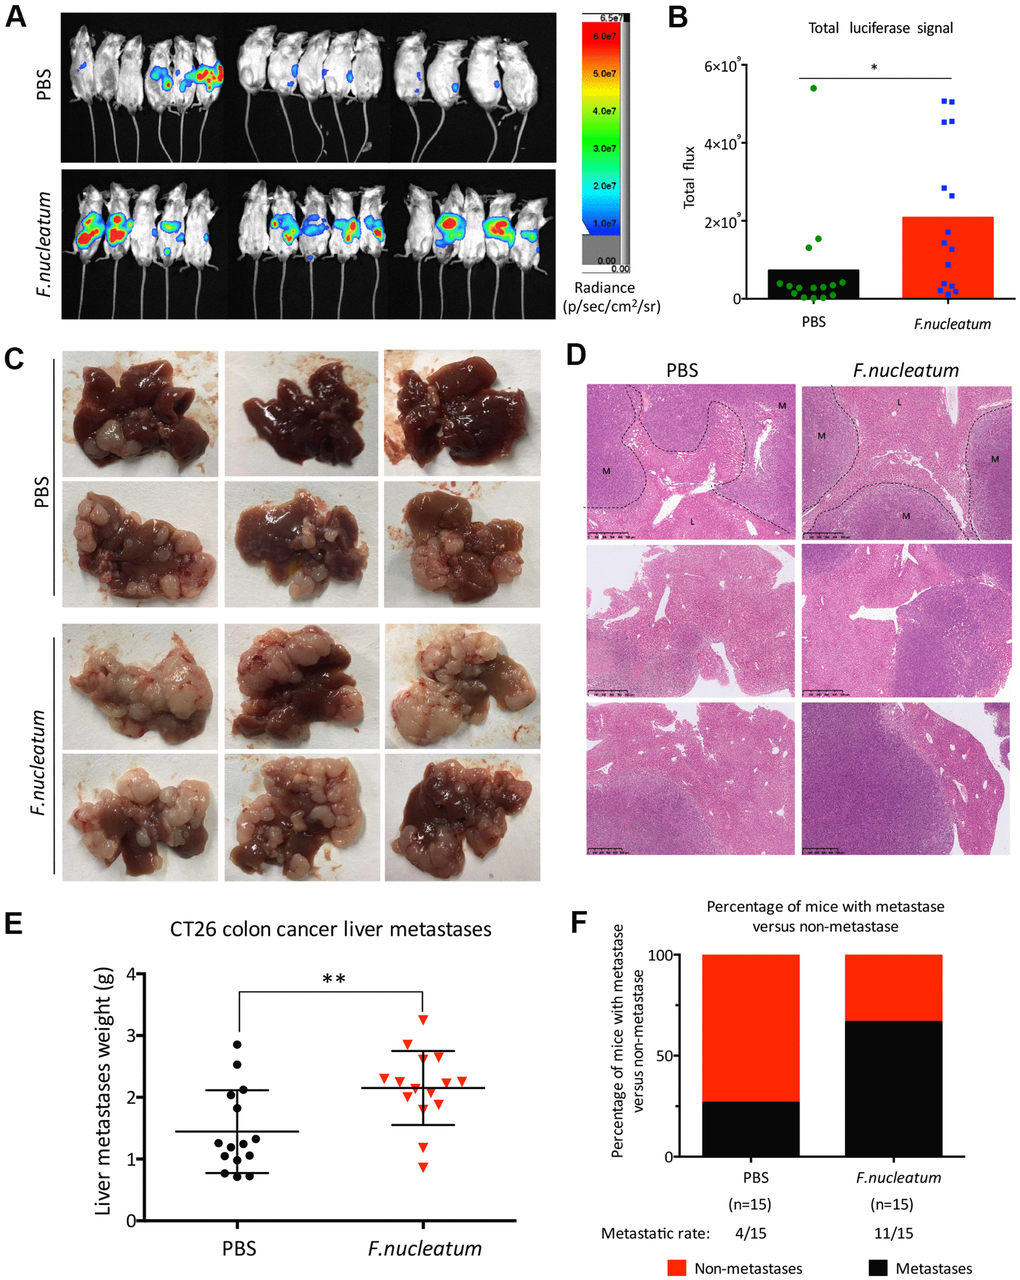 Administration of Fusobacterium nucleatum promotes liver metastasis of colorectal cancer in mice. (A, B) PBS-resuspended 109 colony-forming units of F. nucleatum or PBS were administrated to mice for 8 weeks by gavage every day. The mice received intra-splenic injection post 2-week administration of F. nucleatum or PBS intragastrically. At day 28 after intra-splenic transplantation of CT26-Luc cells, in vivo bioluminescence imaging was used to assess liver metastases (A) of BALB/c mice (n=15 per group). (B) The corresponding data expressed by the change in the total signal flux. Data are presented as mean ± standard deviation (SD; *P P P C, D) After the 2-week treatment of F. nucleatum or PBS, mice received intra-splenic injection of CT26 tumor cells. Four weeks later, the mice were euthanized, and subsequent histological studies were performed. The representative metastatic foci (C) and hematoxylin and eosin-stained liver sections (D) in mice are shown. (E, F) Livers were weighed (E) and liver metastatic rates were measured (F). Data are presented as mean ± SD (*P P P 